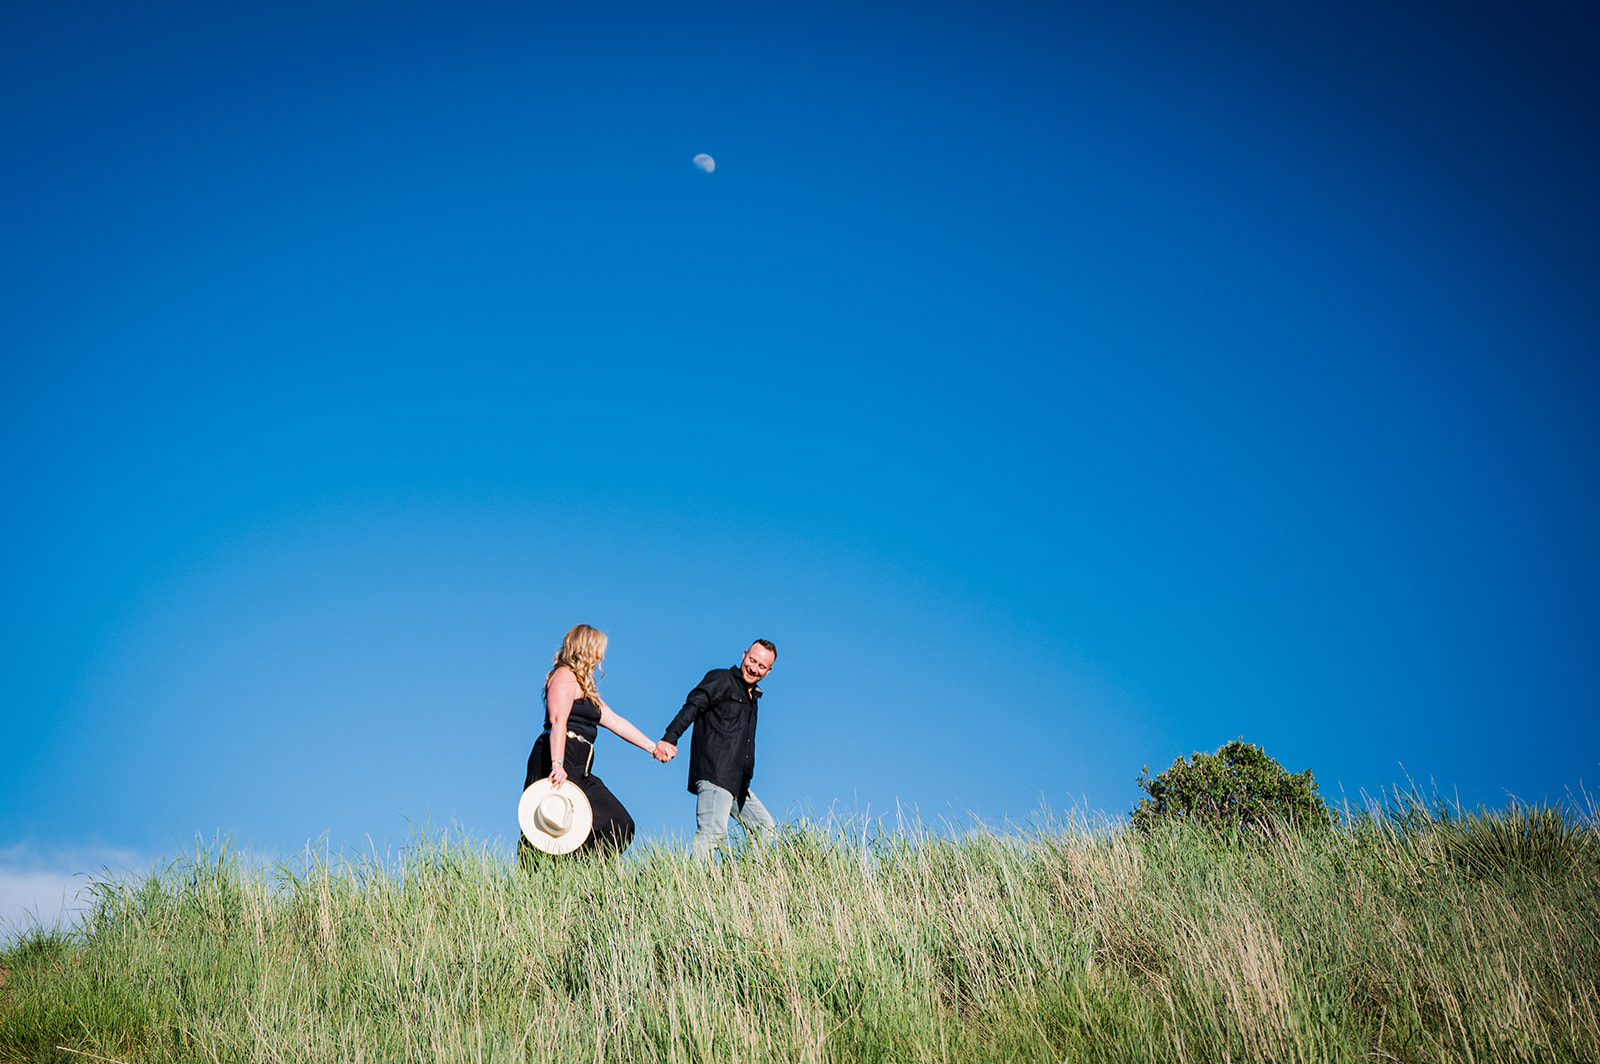 Man leads woman by the hand across open field with a big blue sky in the background.